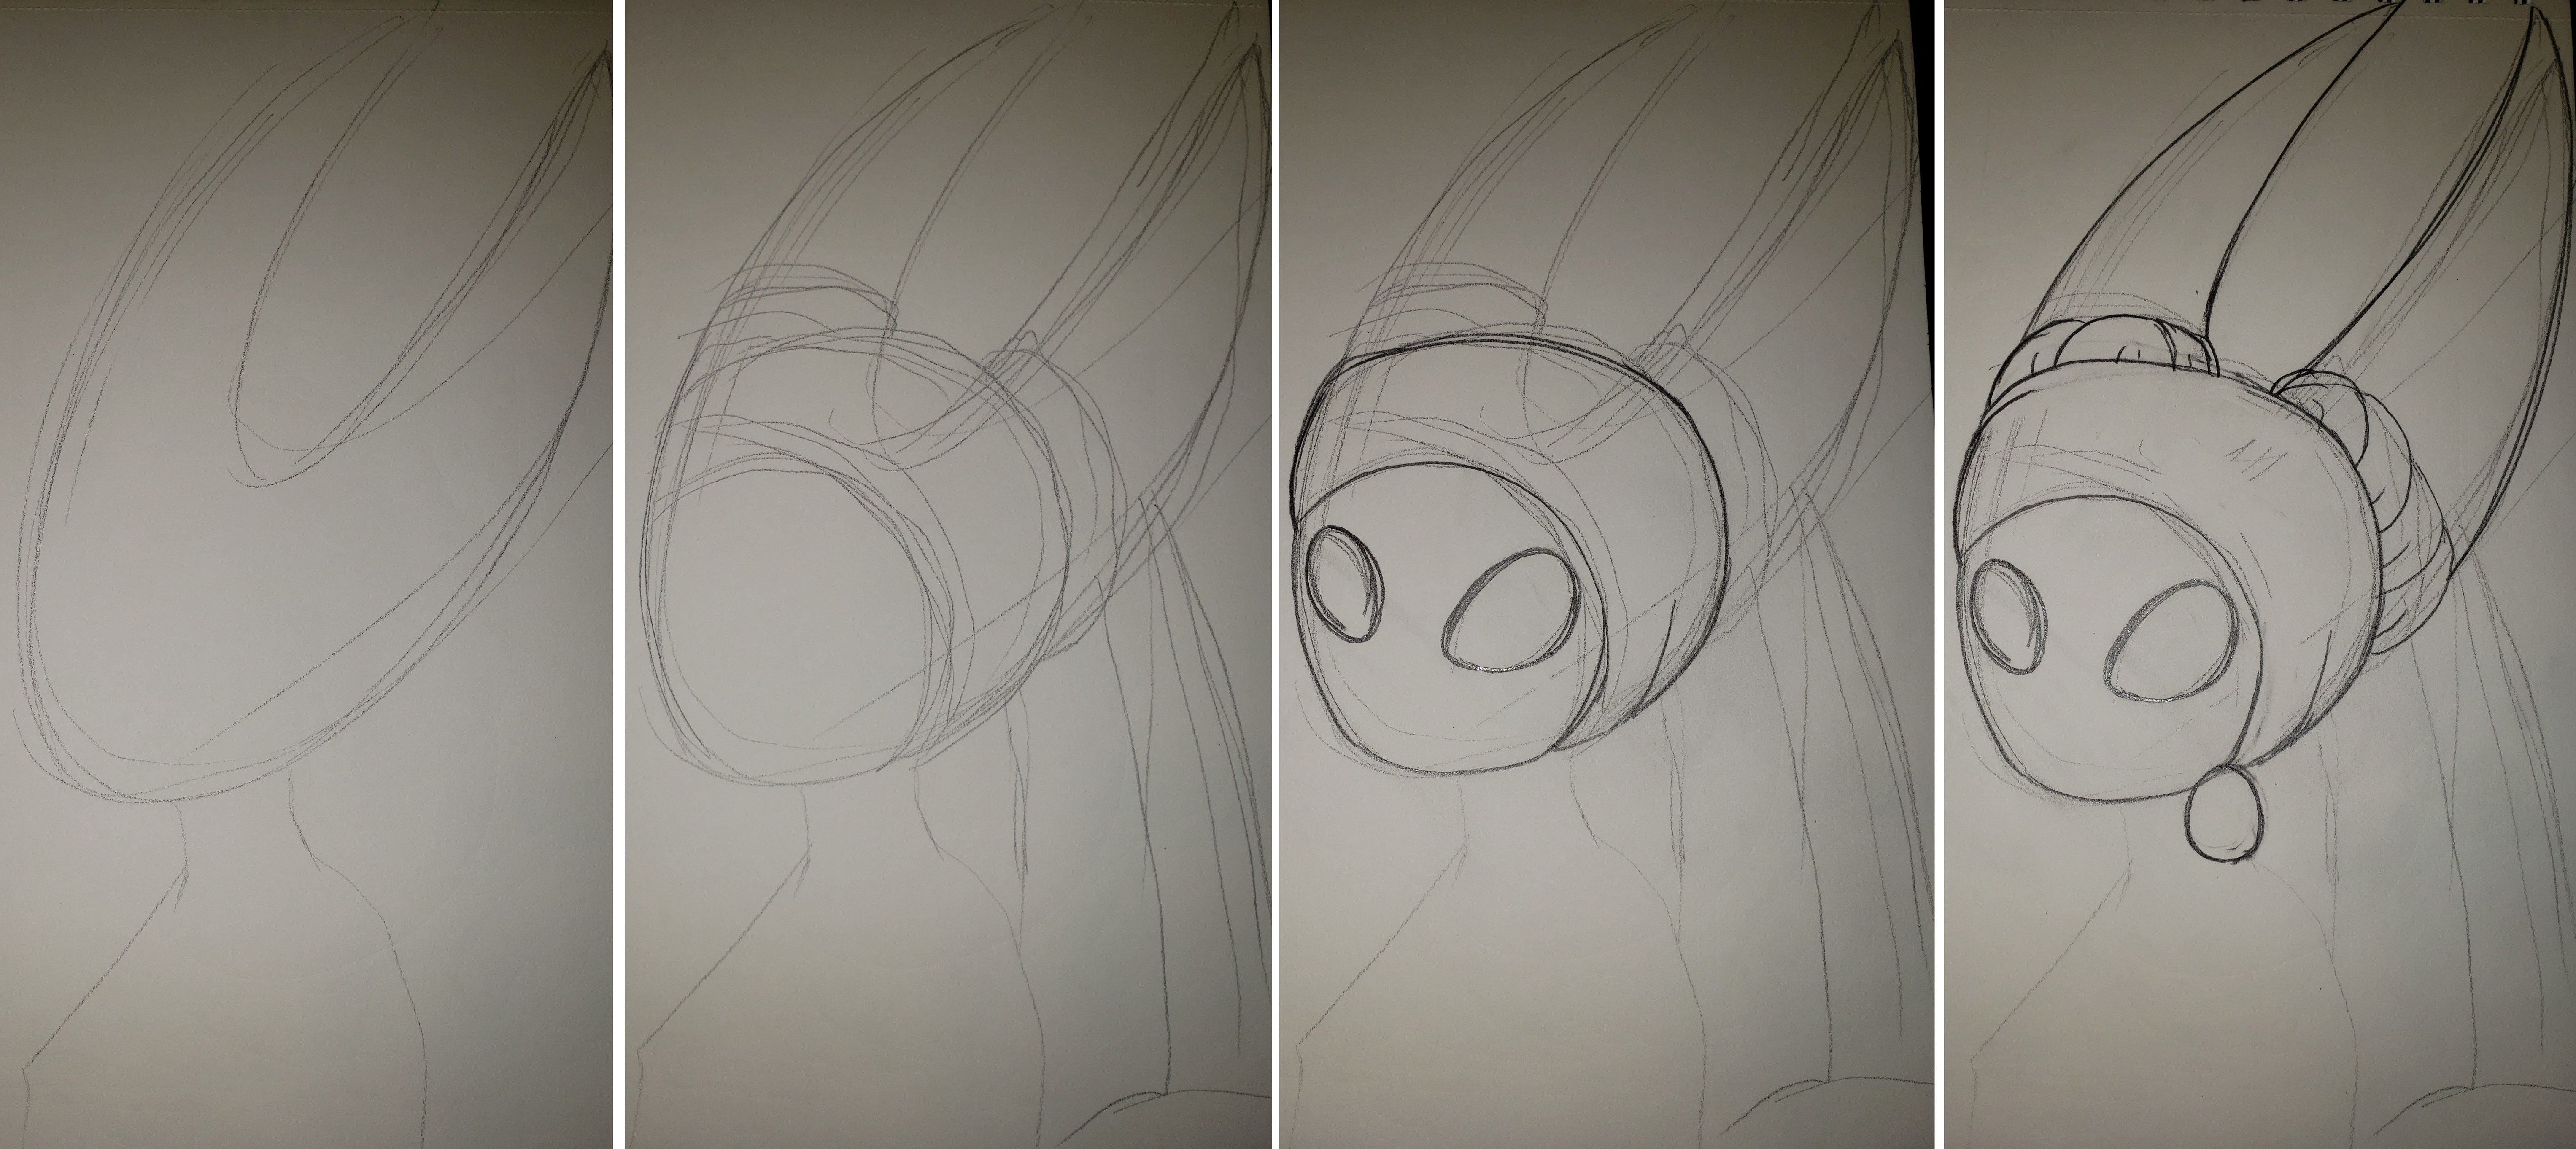 artsy sister, the hollow knight, the girl with a pearl earring parody